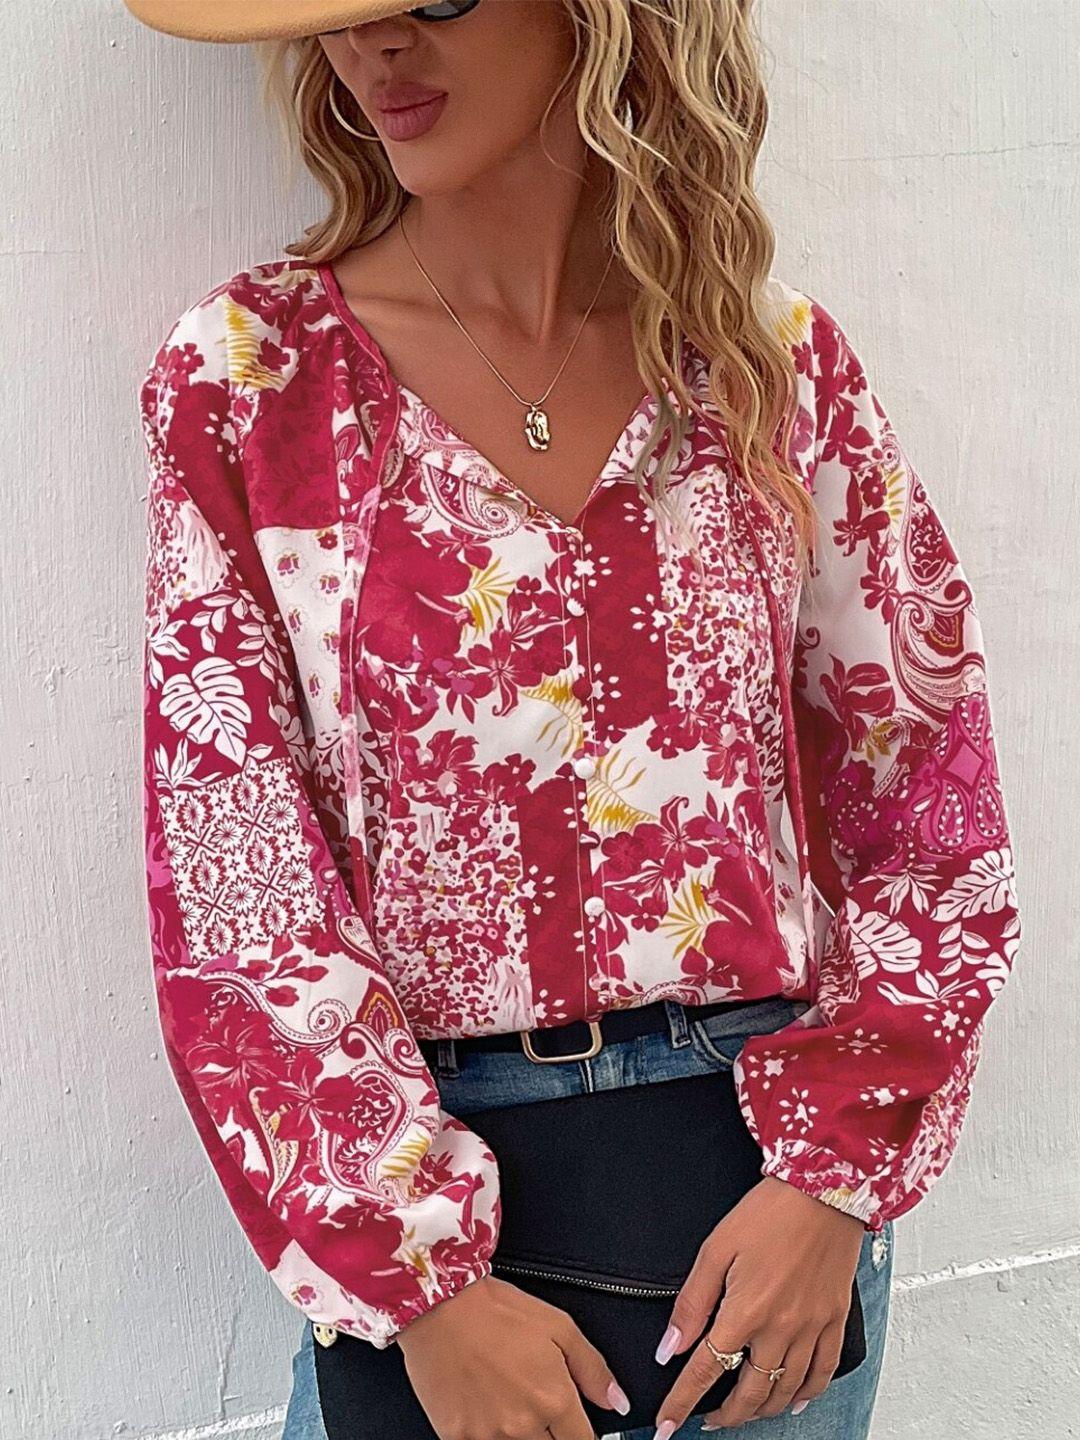 stylecast red floral printed tie-up neck cuffed sleeves shirt style top